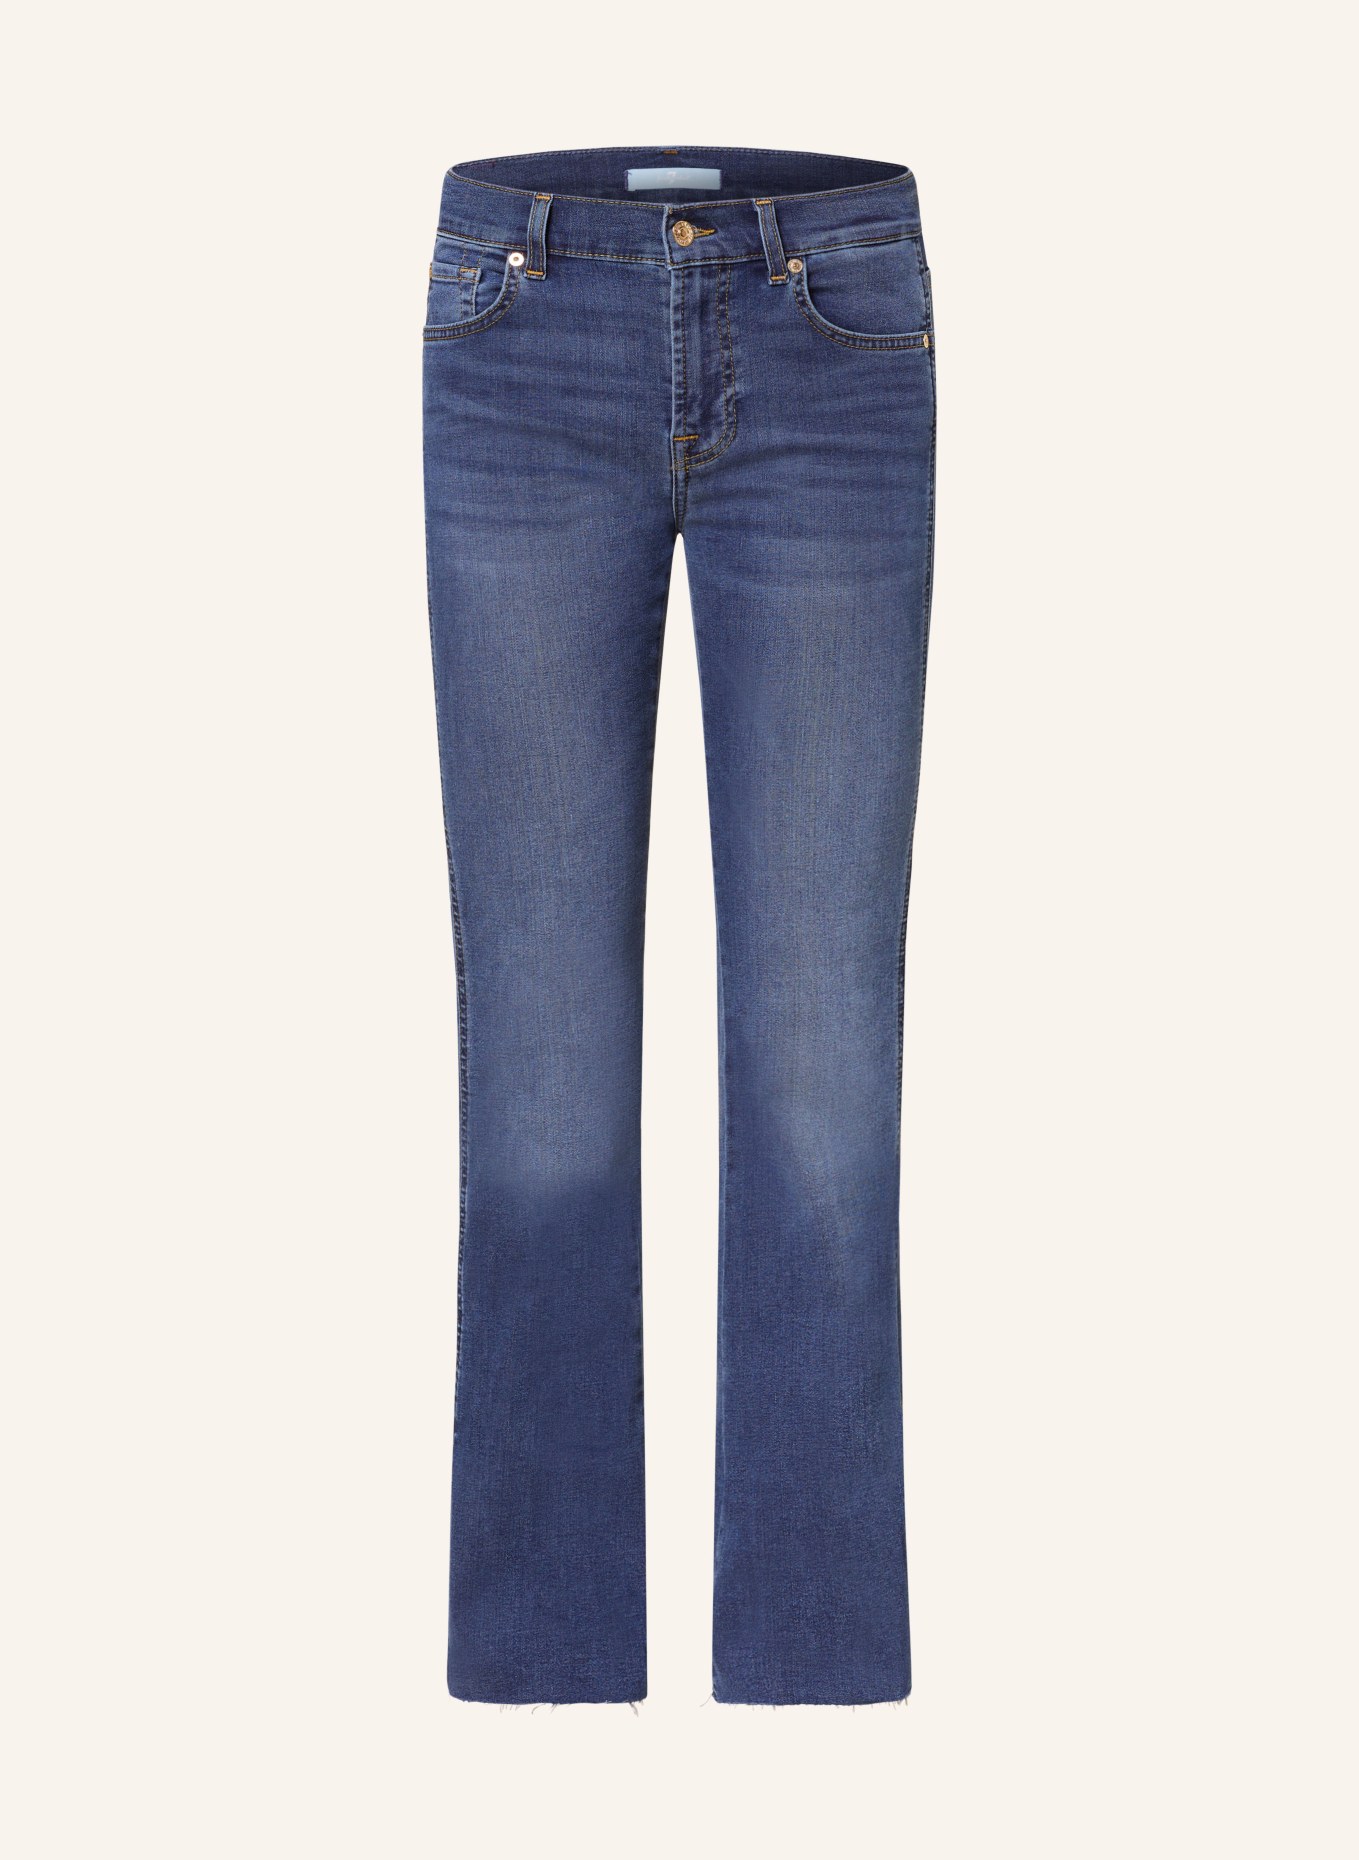 7 for all mankind Bootcut Jeans BAIDUC, Farbe: MID BLUE(Bild null)